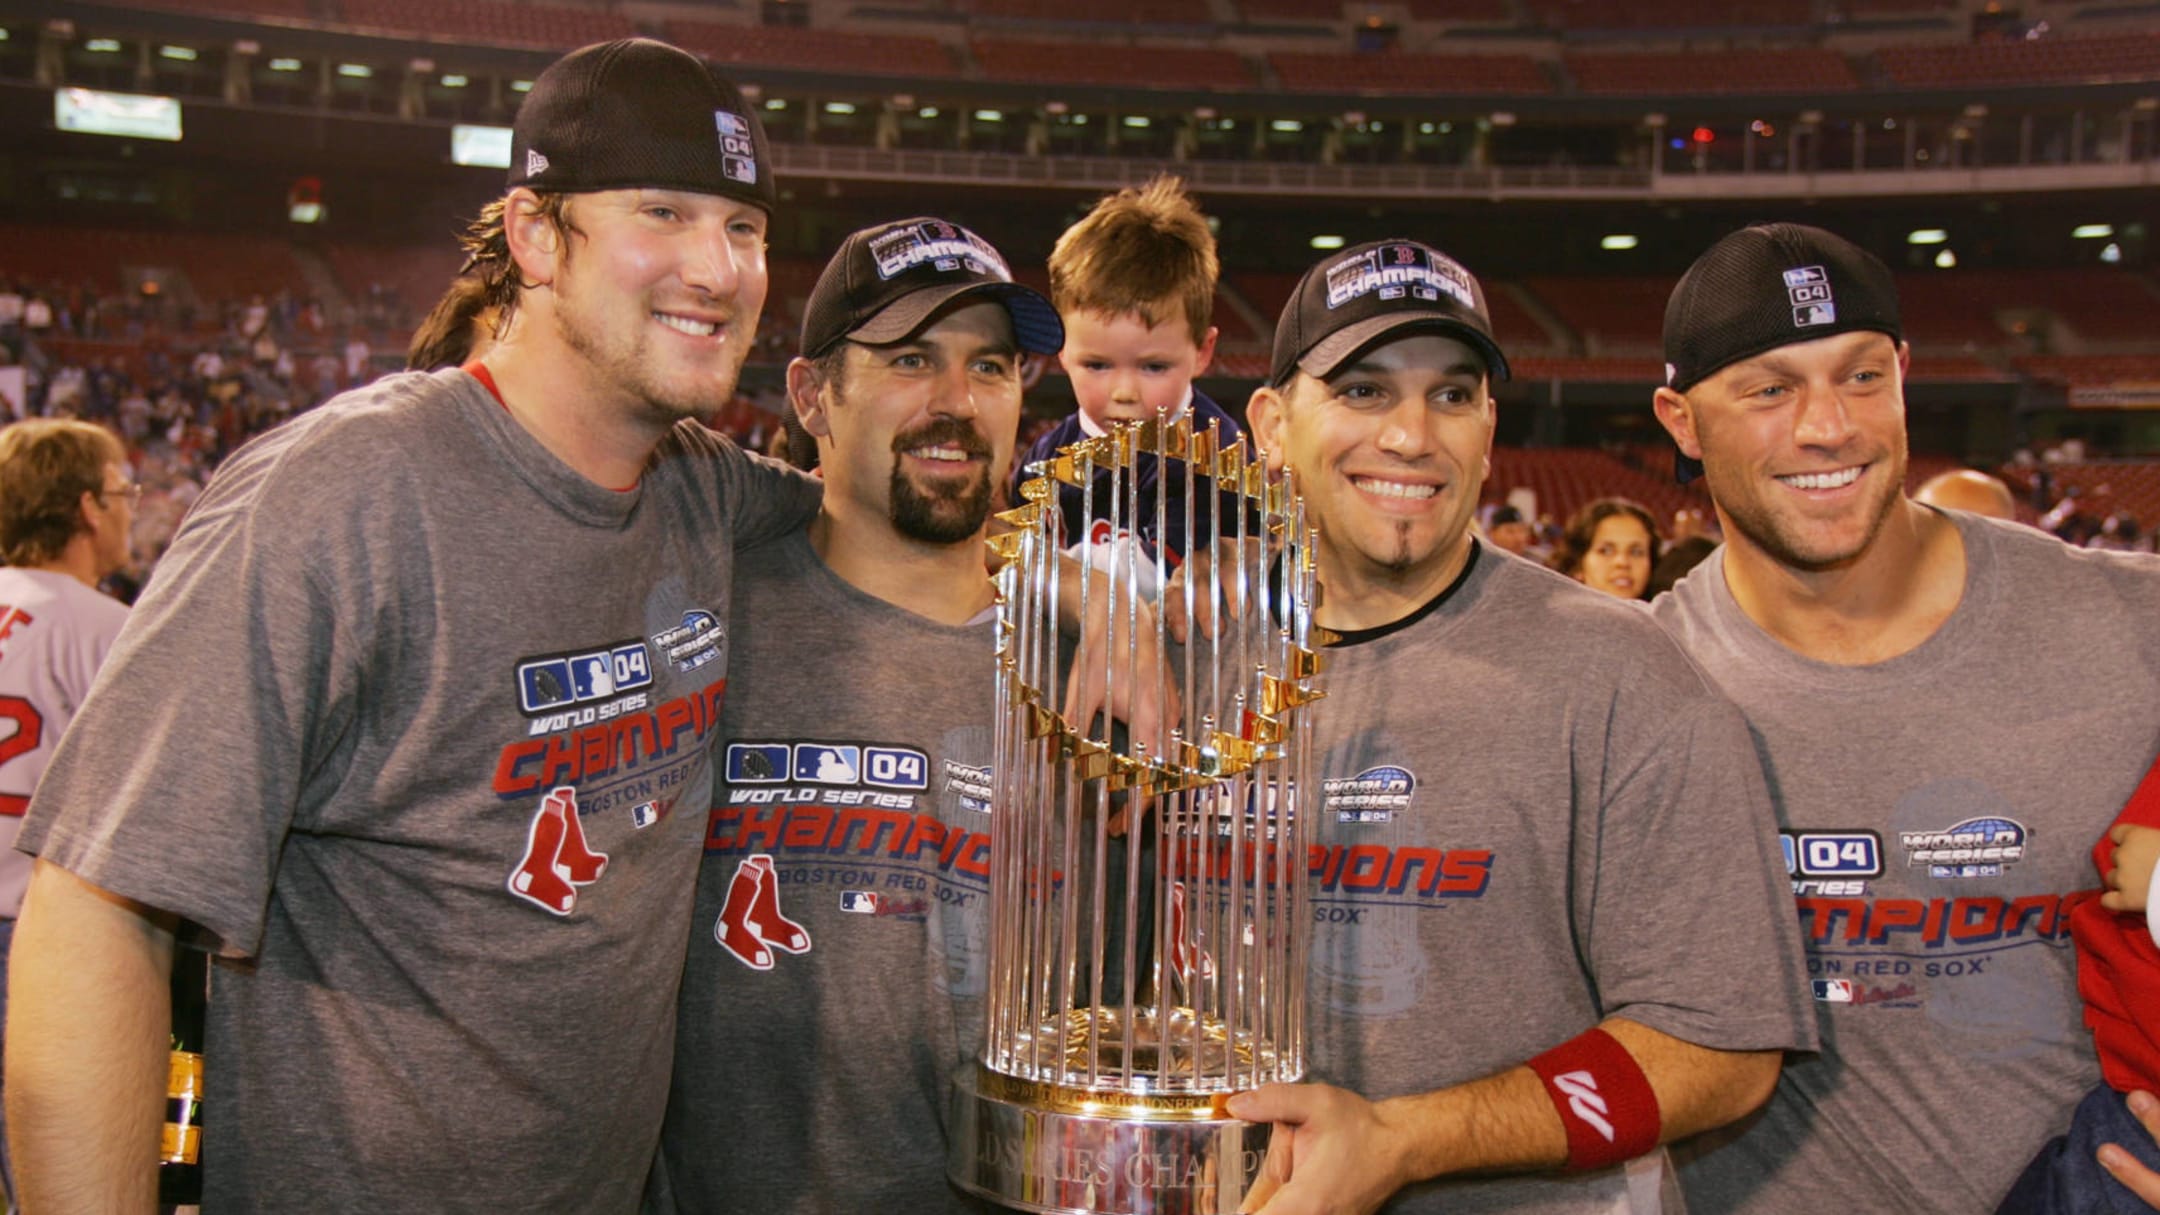 The '2004 Red Sox (aka the Idiots)' quiz